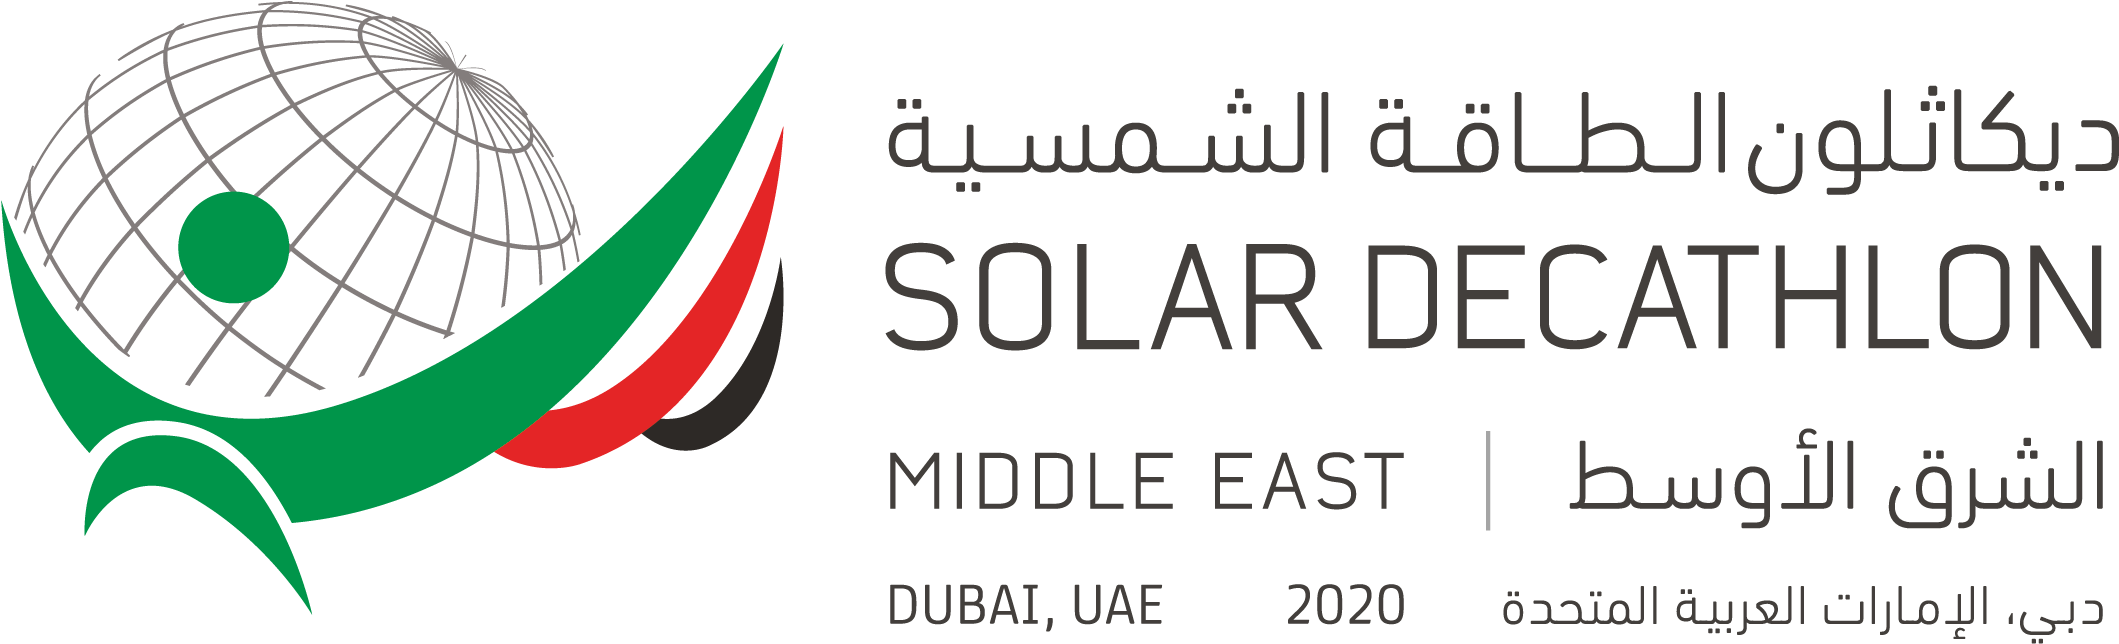 Solar Decathlon Middle East, Hd Png Download